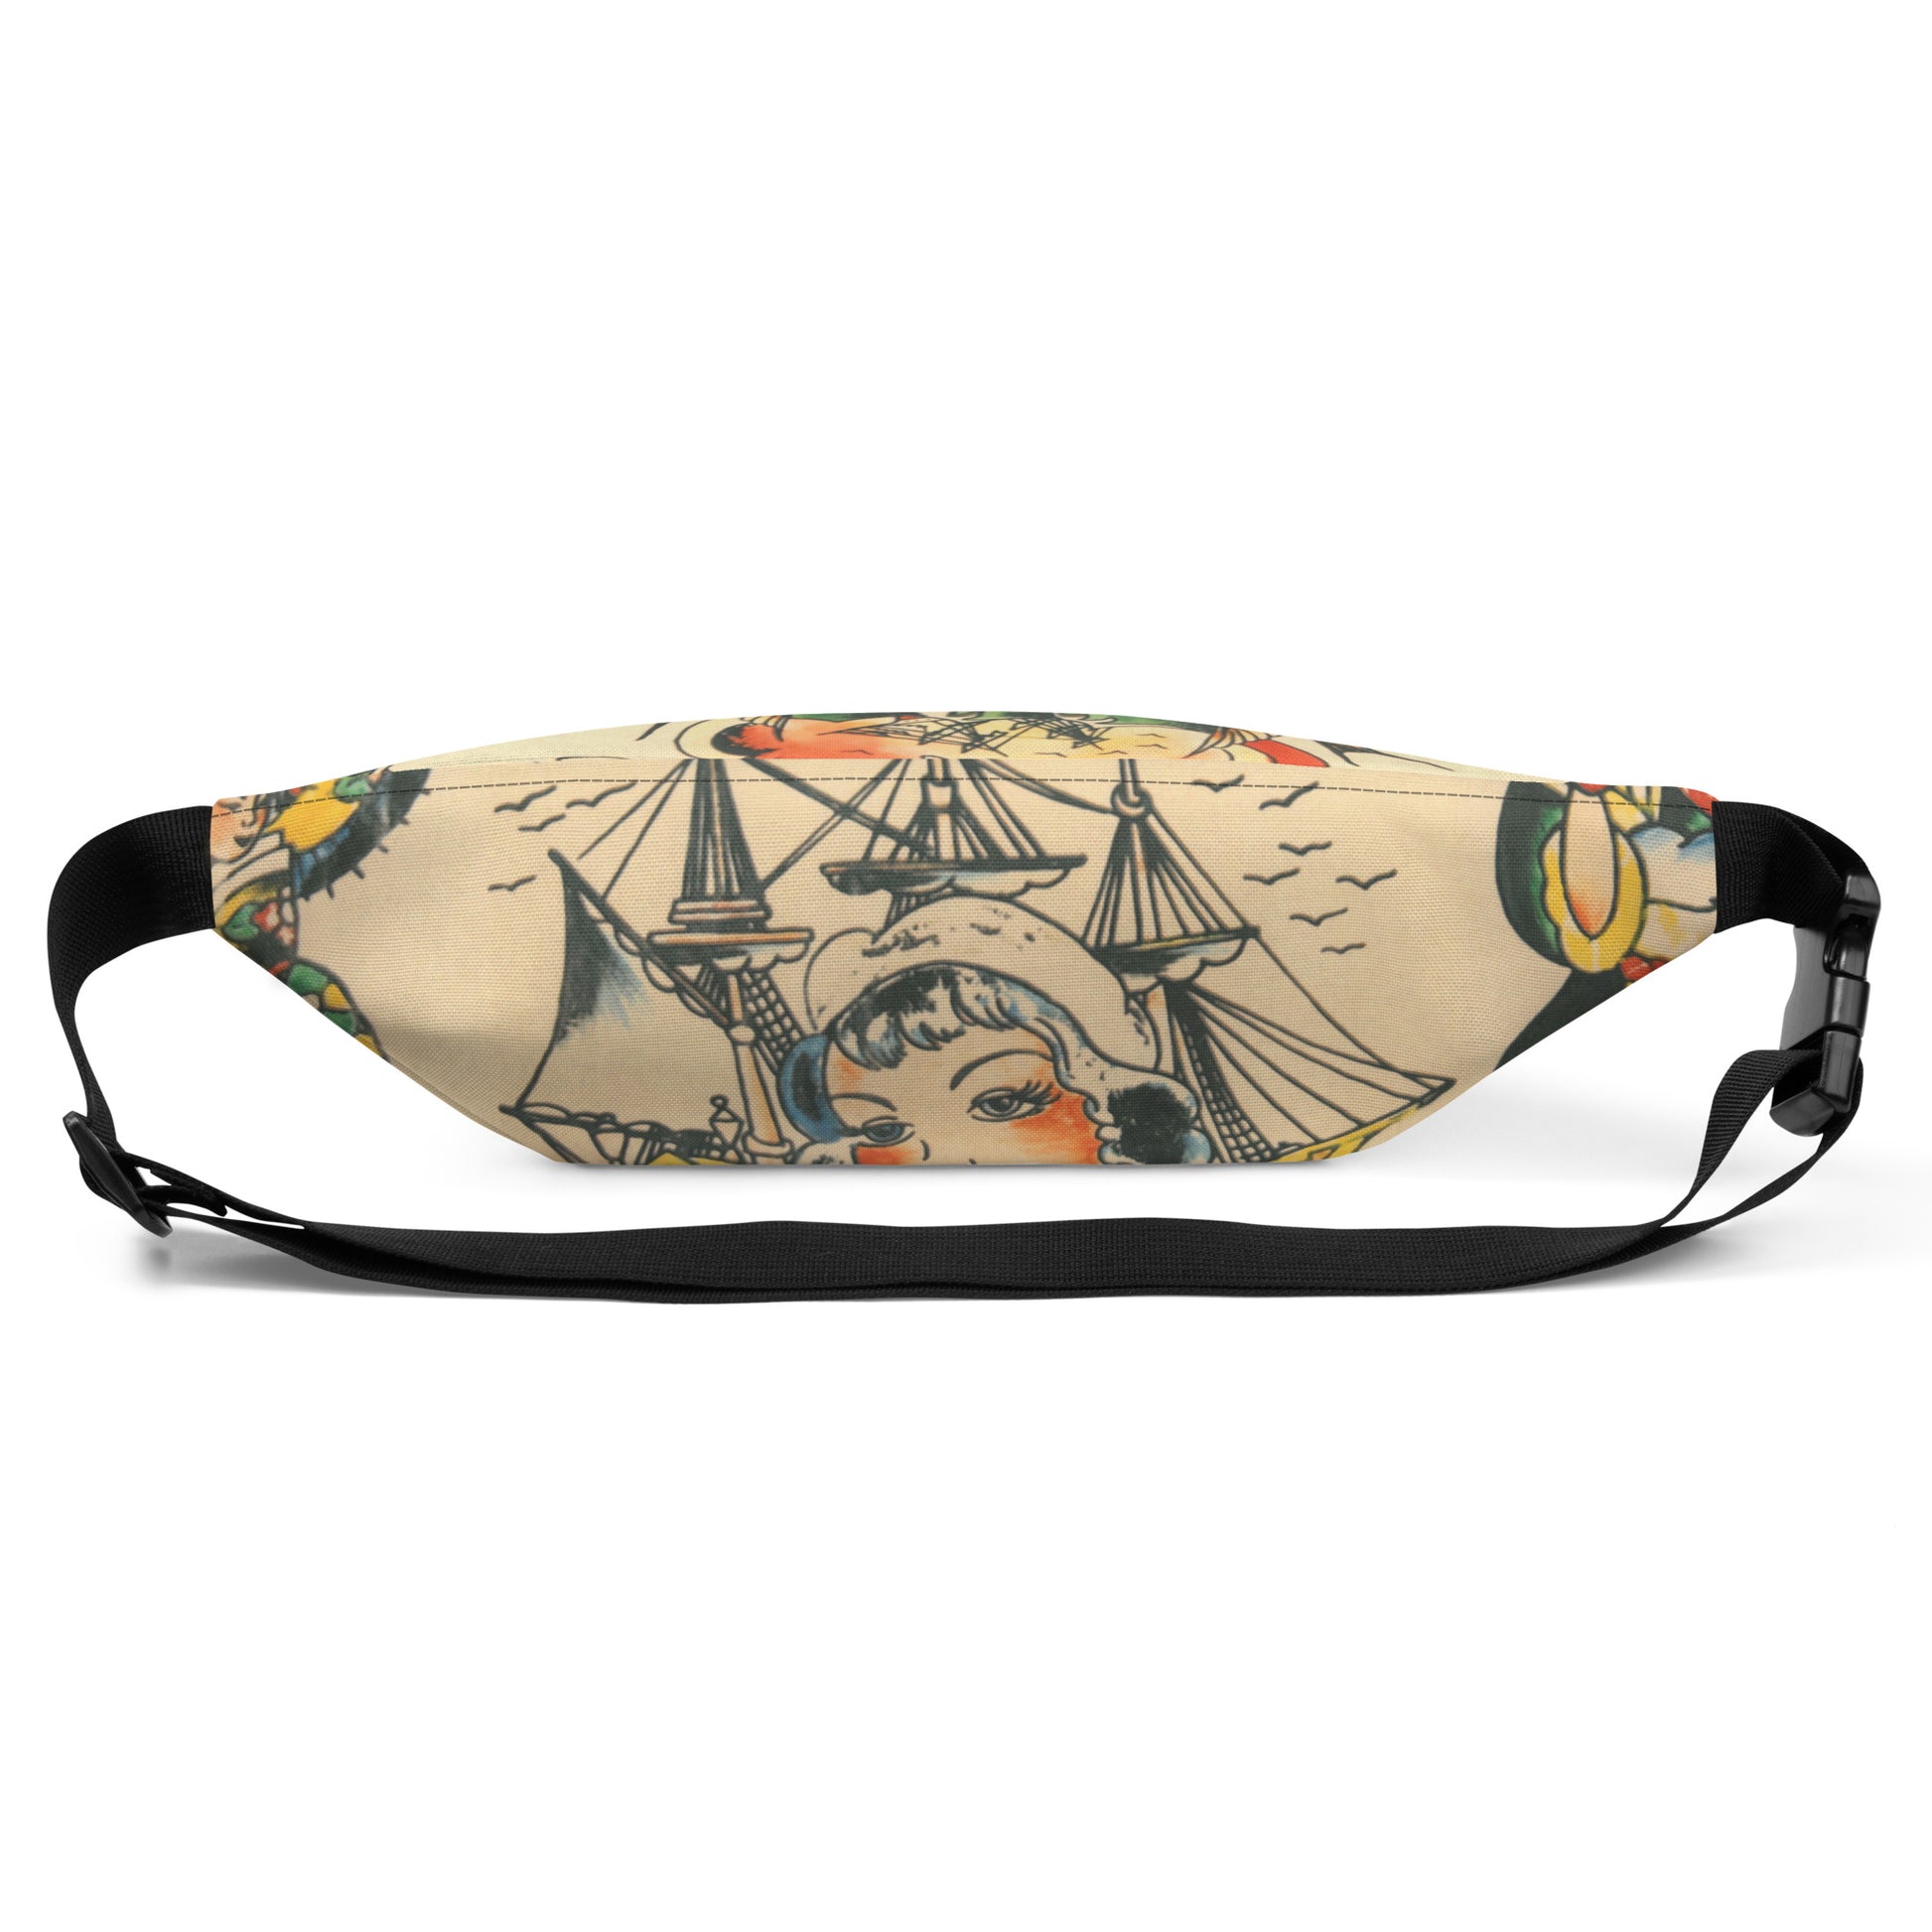 Fanny pack with unique ship design for safe keeping back